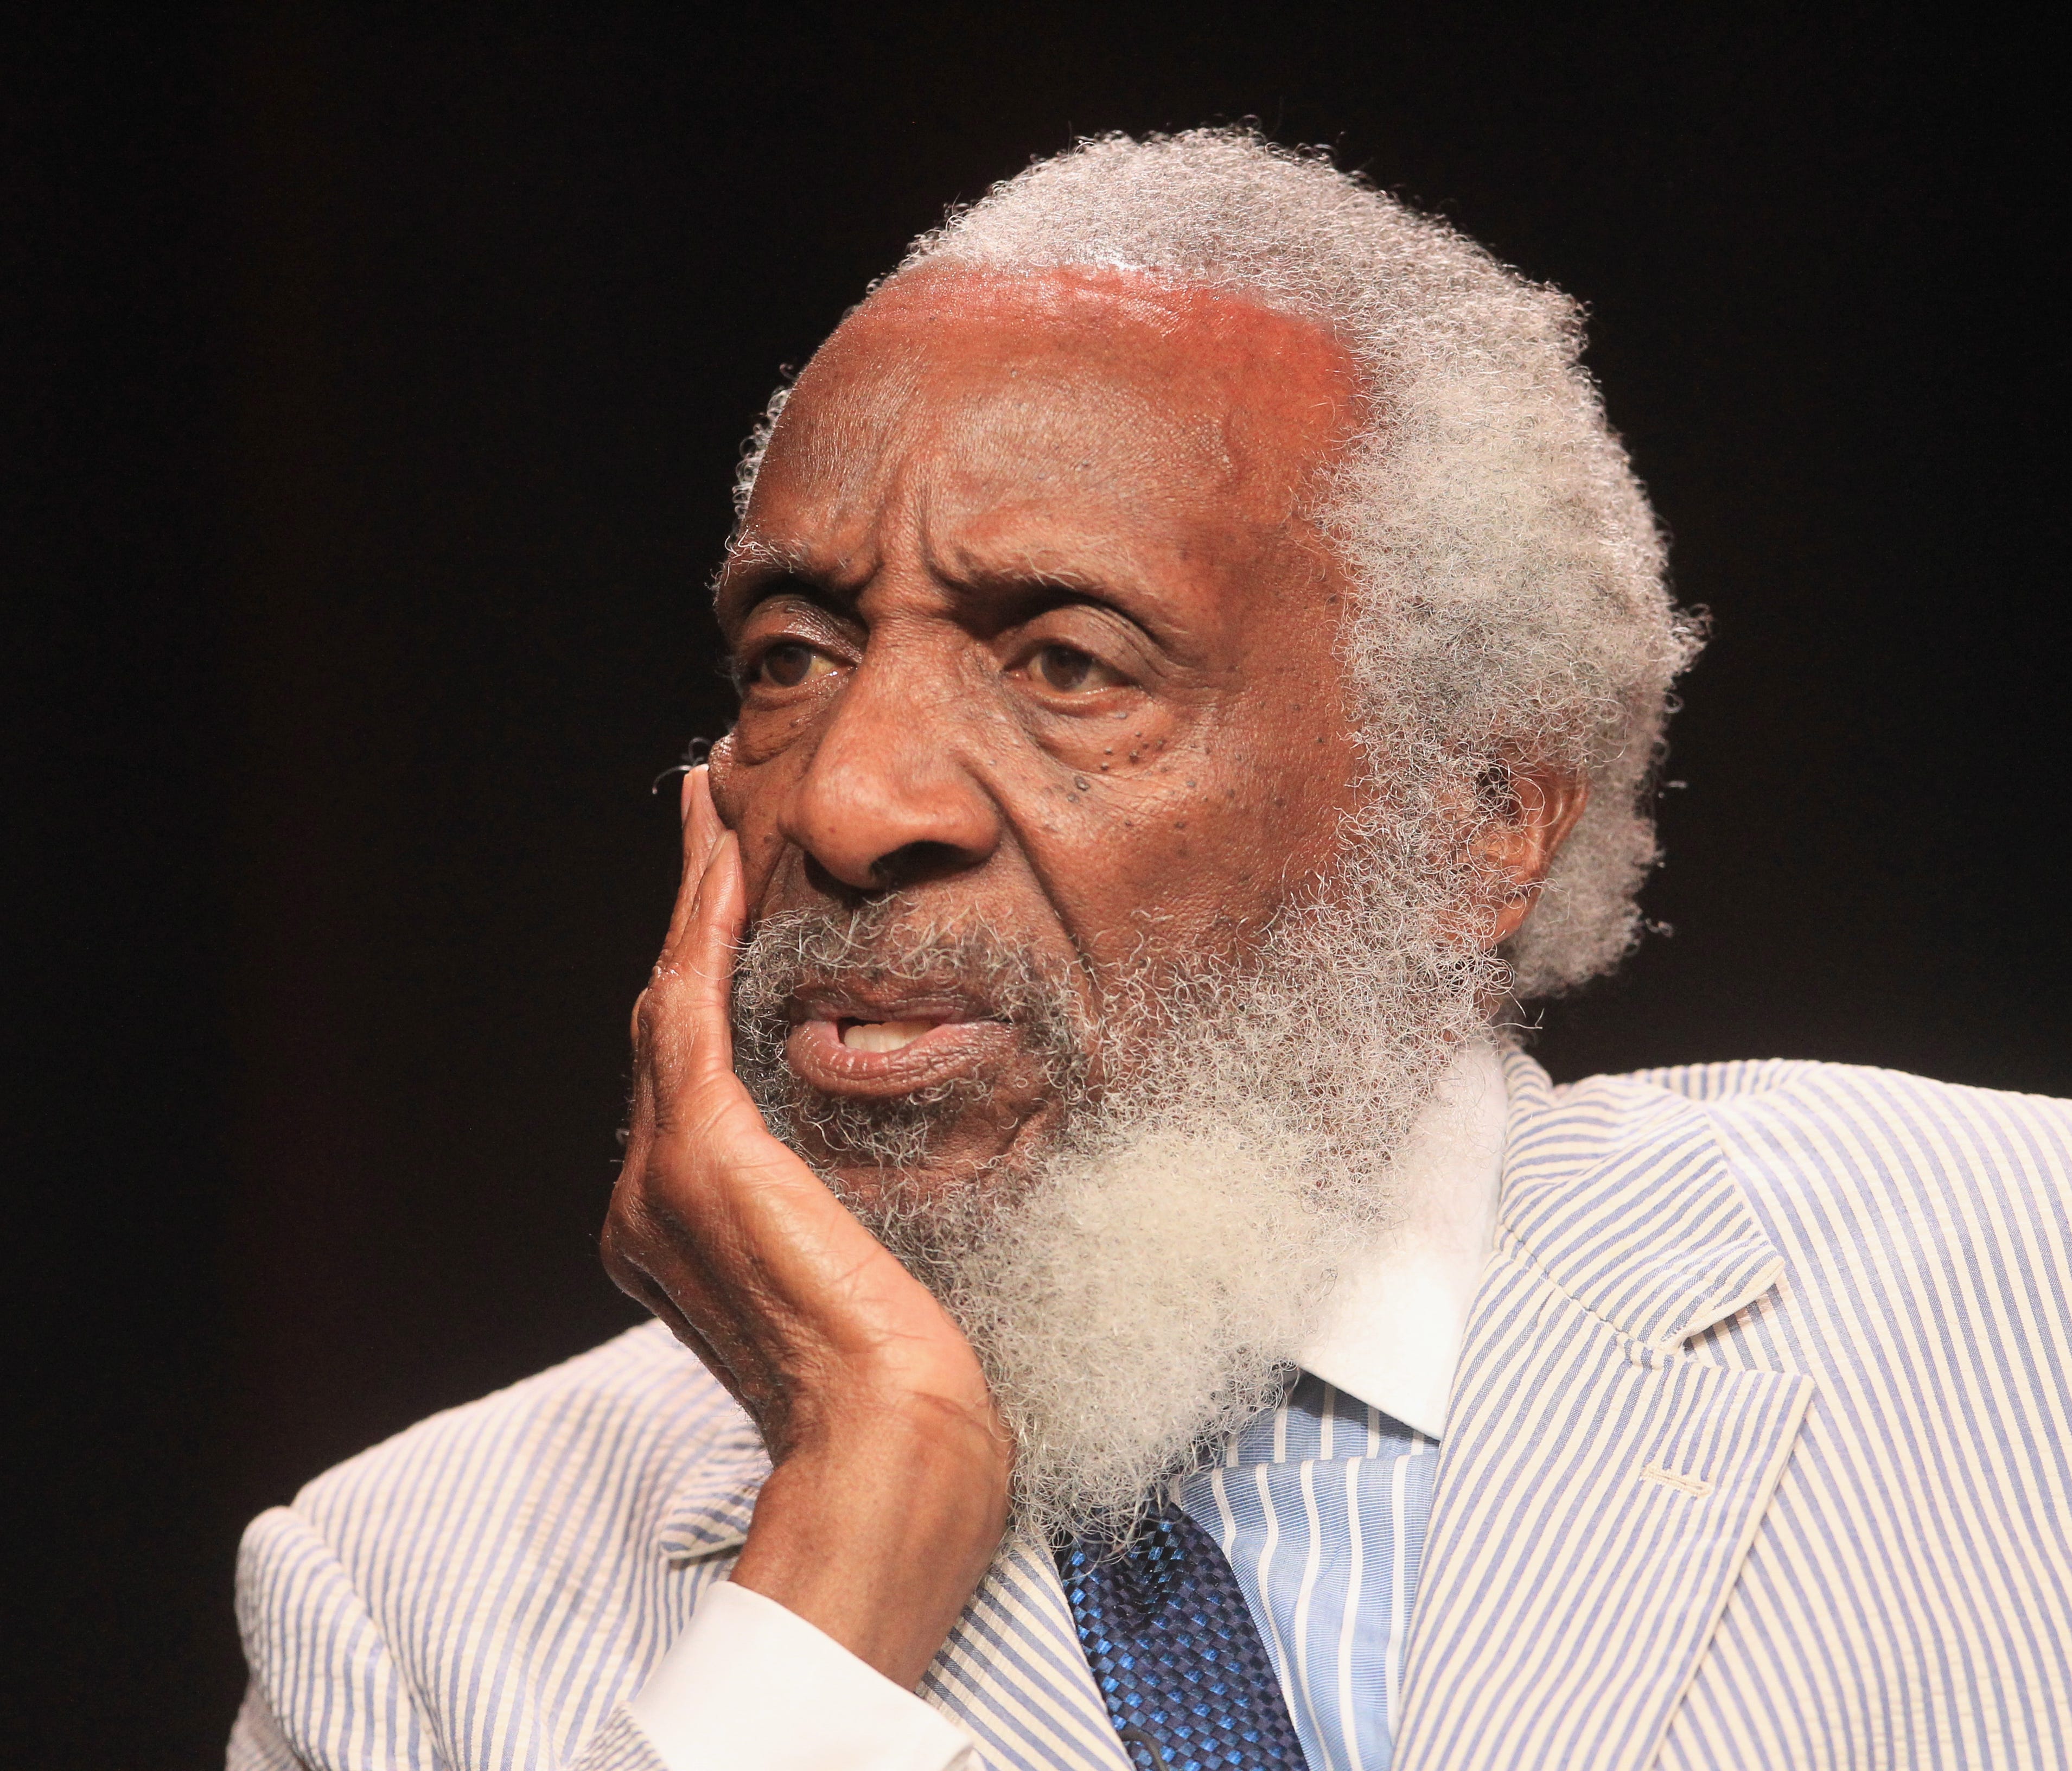 Comedian and social activist Dick Gregory died Saturday night at age 84.